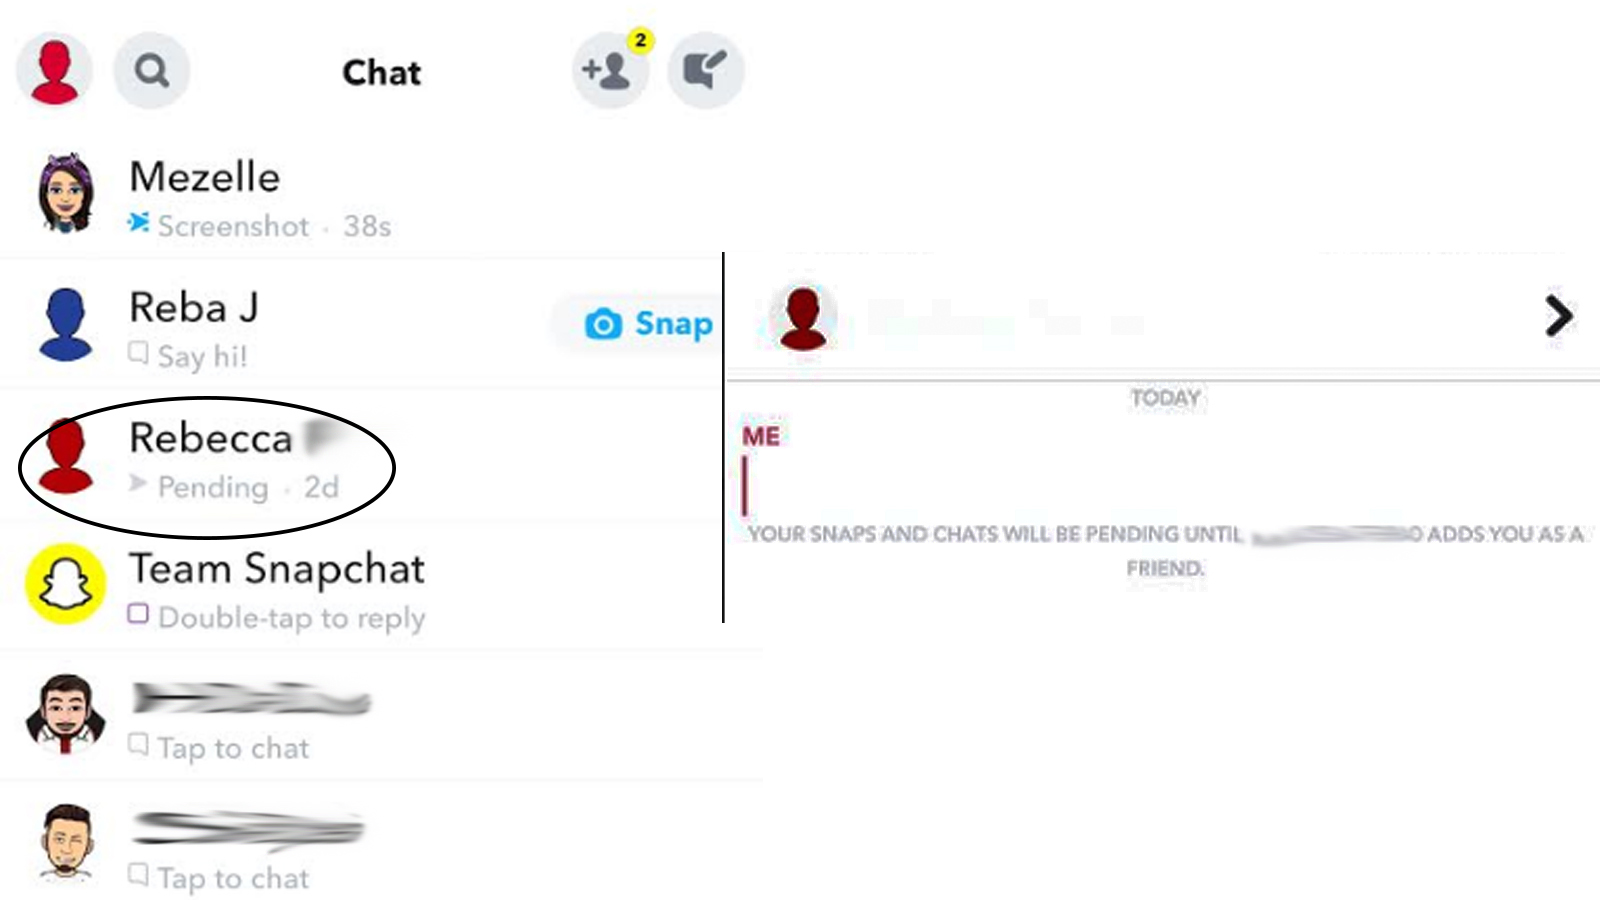 How to tell if Someone Removed you on Snapchat 8? (Step-by-Step)